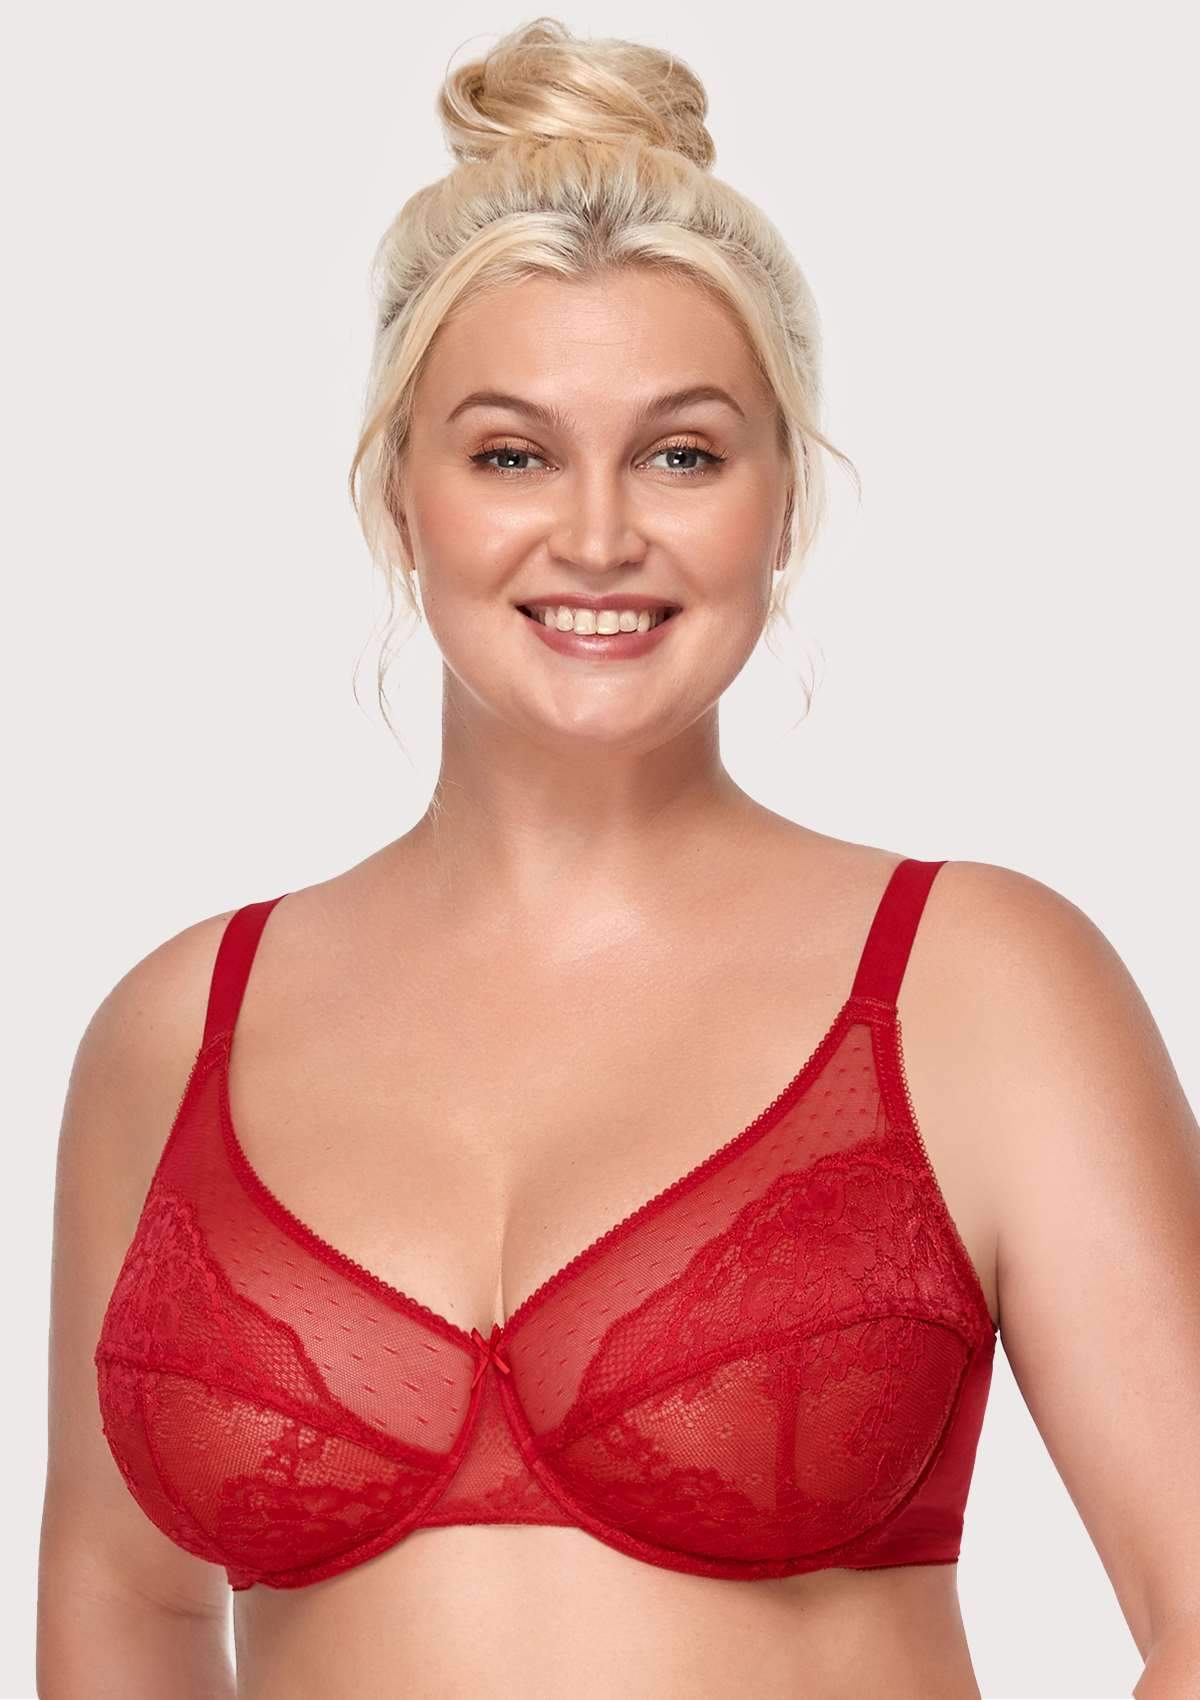 HSIA Enchante Full Support Lace Underwire Bra: Ideal For Big Breasts - Red / 36 / C